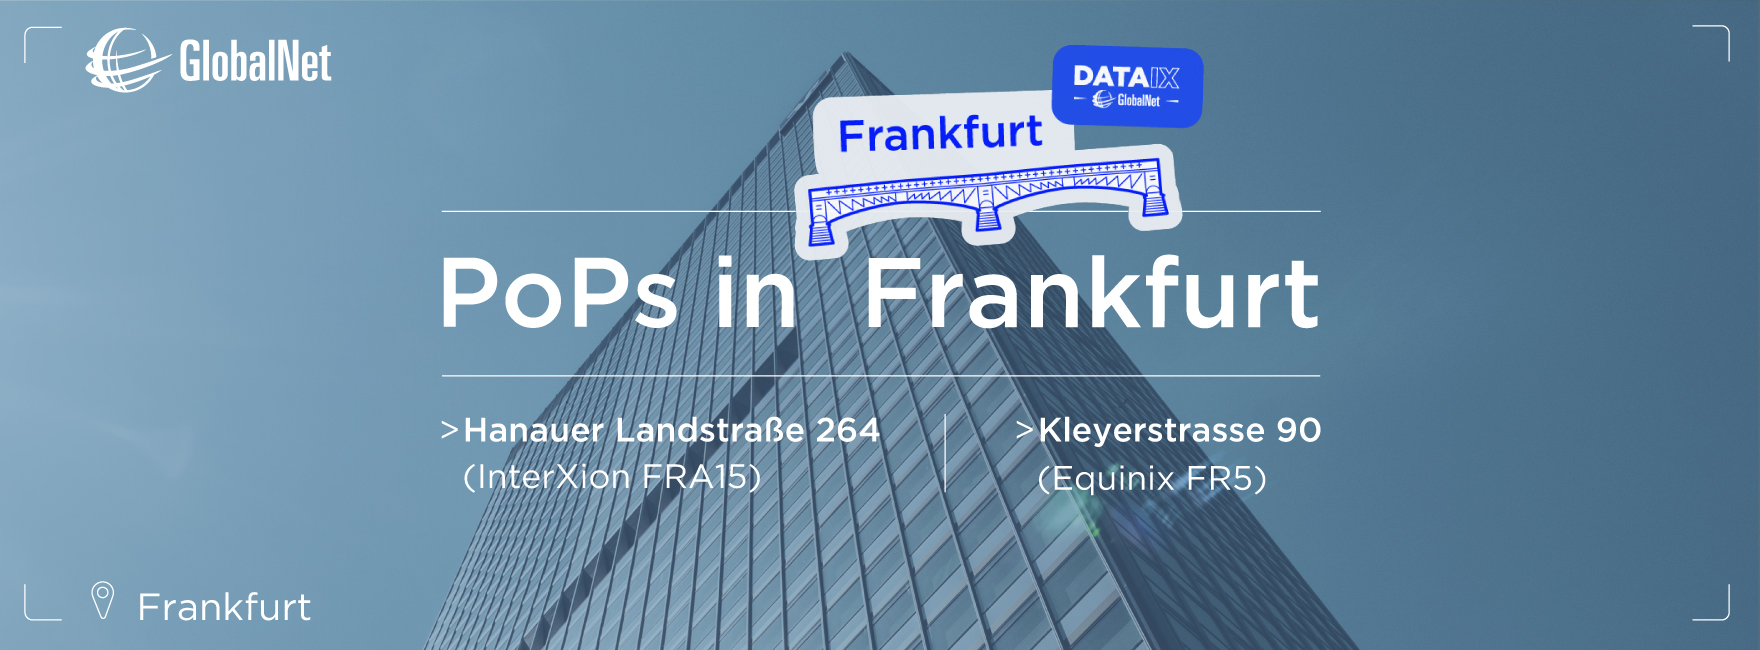 Our points of presence in Frankfurt